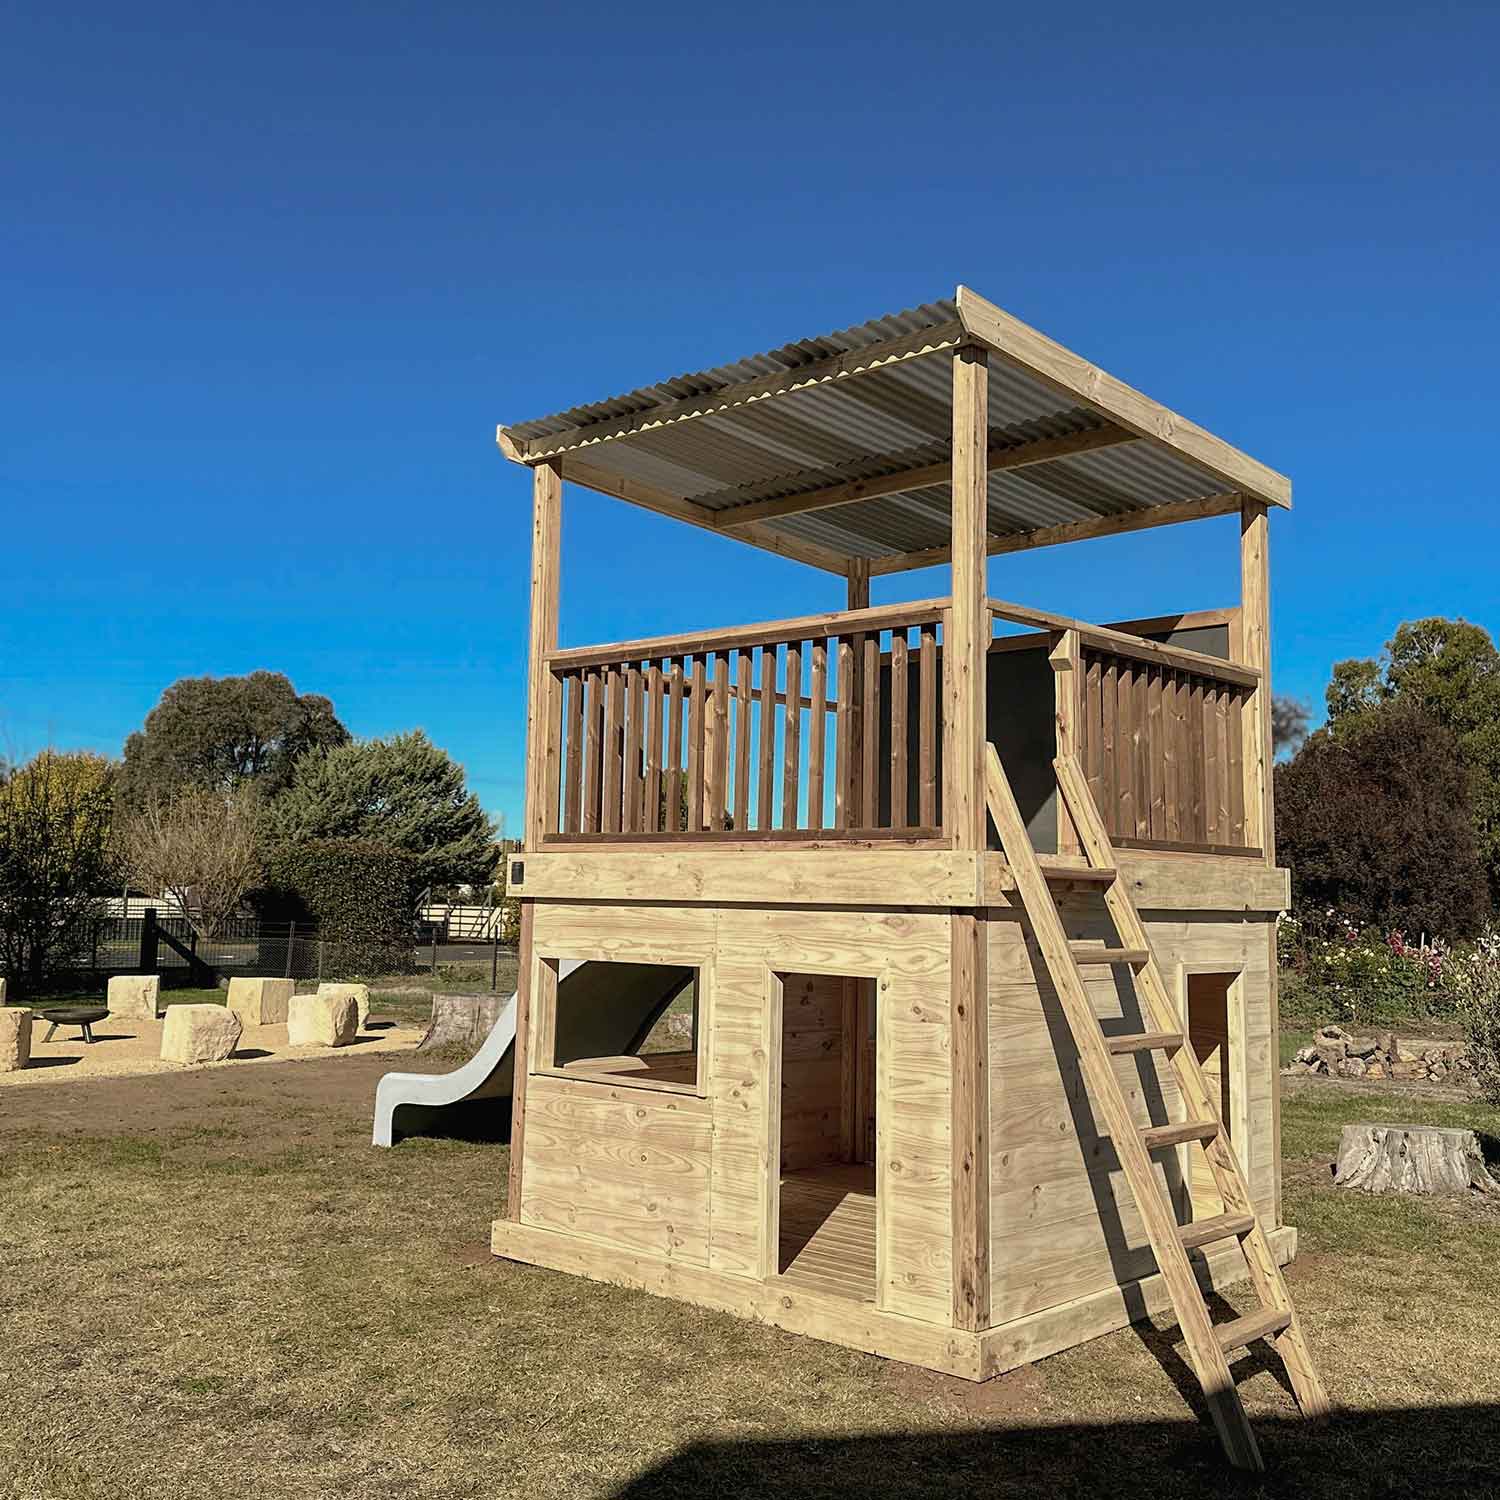 Timber Raised Platform Cubby House with Slide - For Primary Schools & Early Learning Centres - Hand Built in Australia by Castle & Cubby.